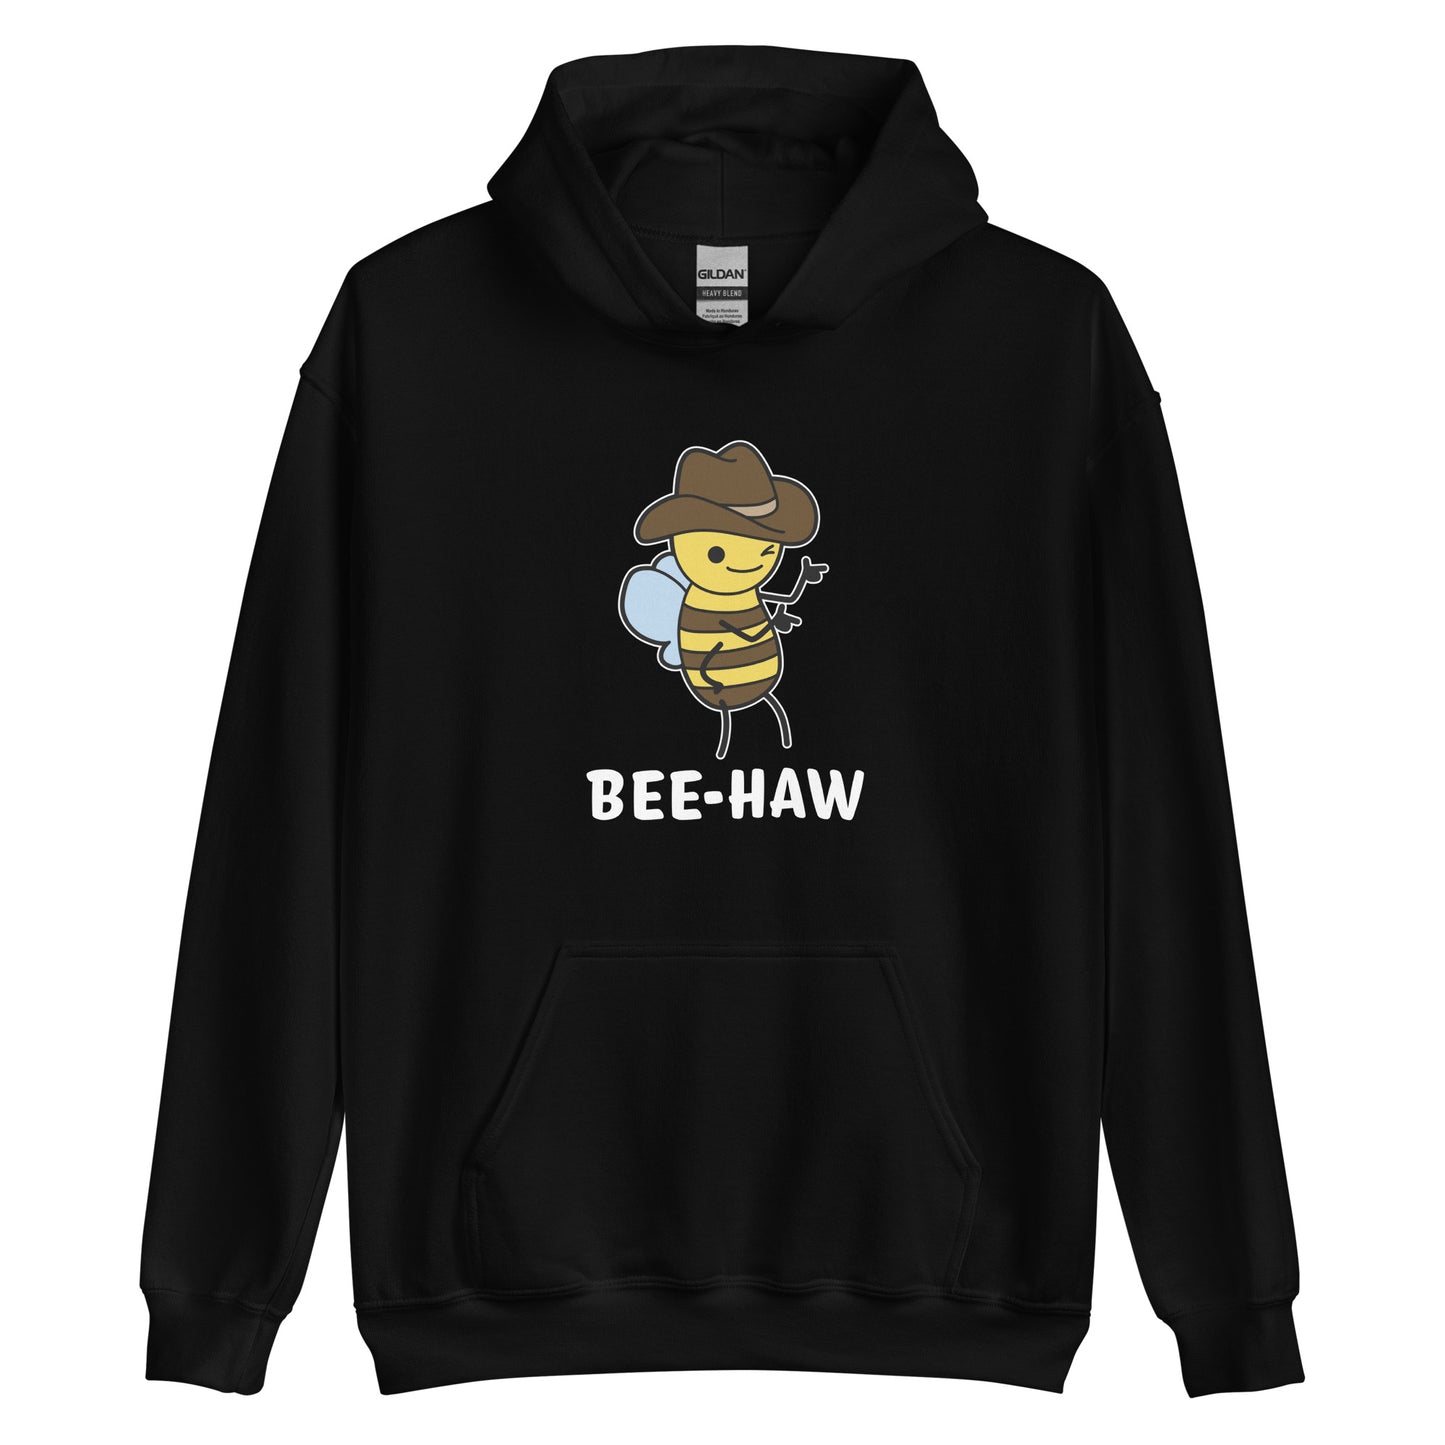 A black hooded sweatshirt featuring a picture of a bee wearing a cowboy hat. The bee is winking and pointing finger guns. Text underneath the bee reads "Bee-Haw"